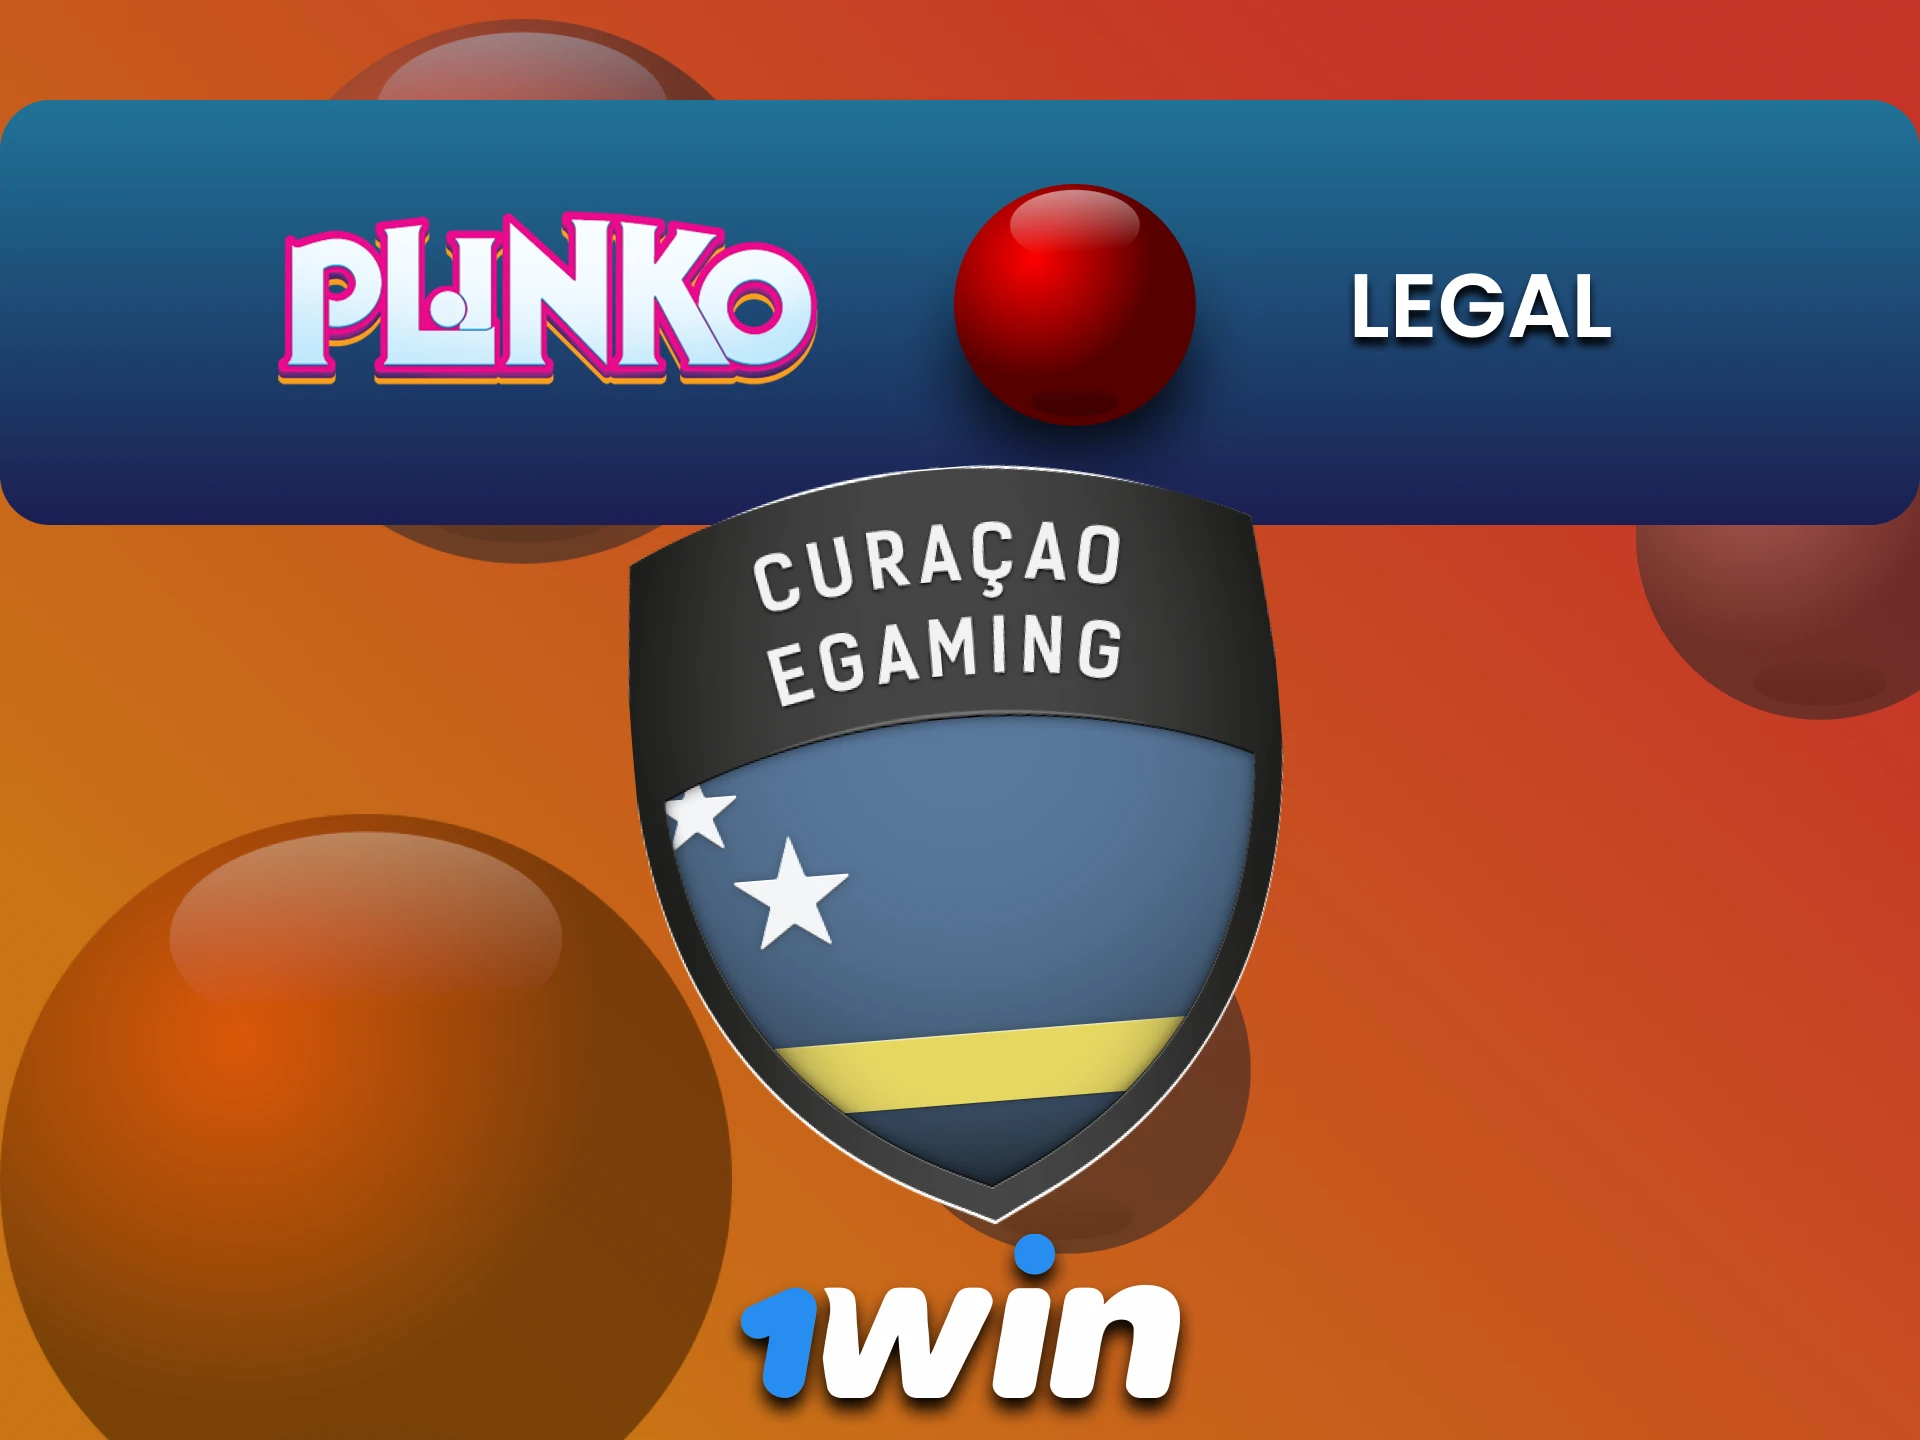 1win is legal to play Plinko.